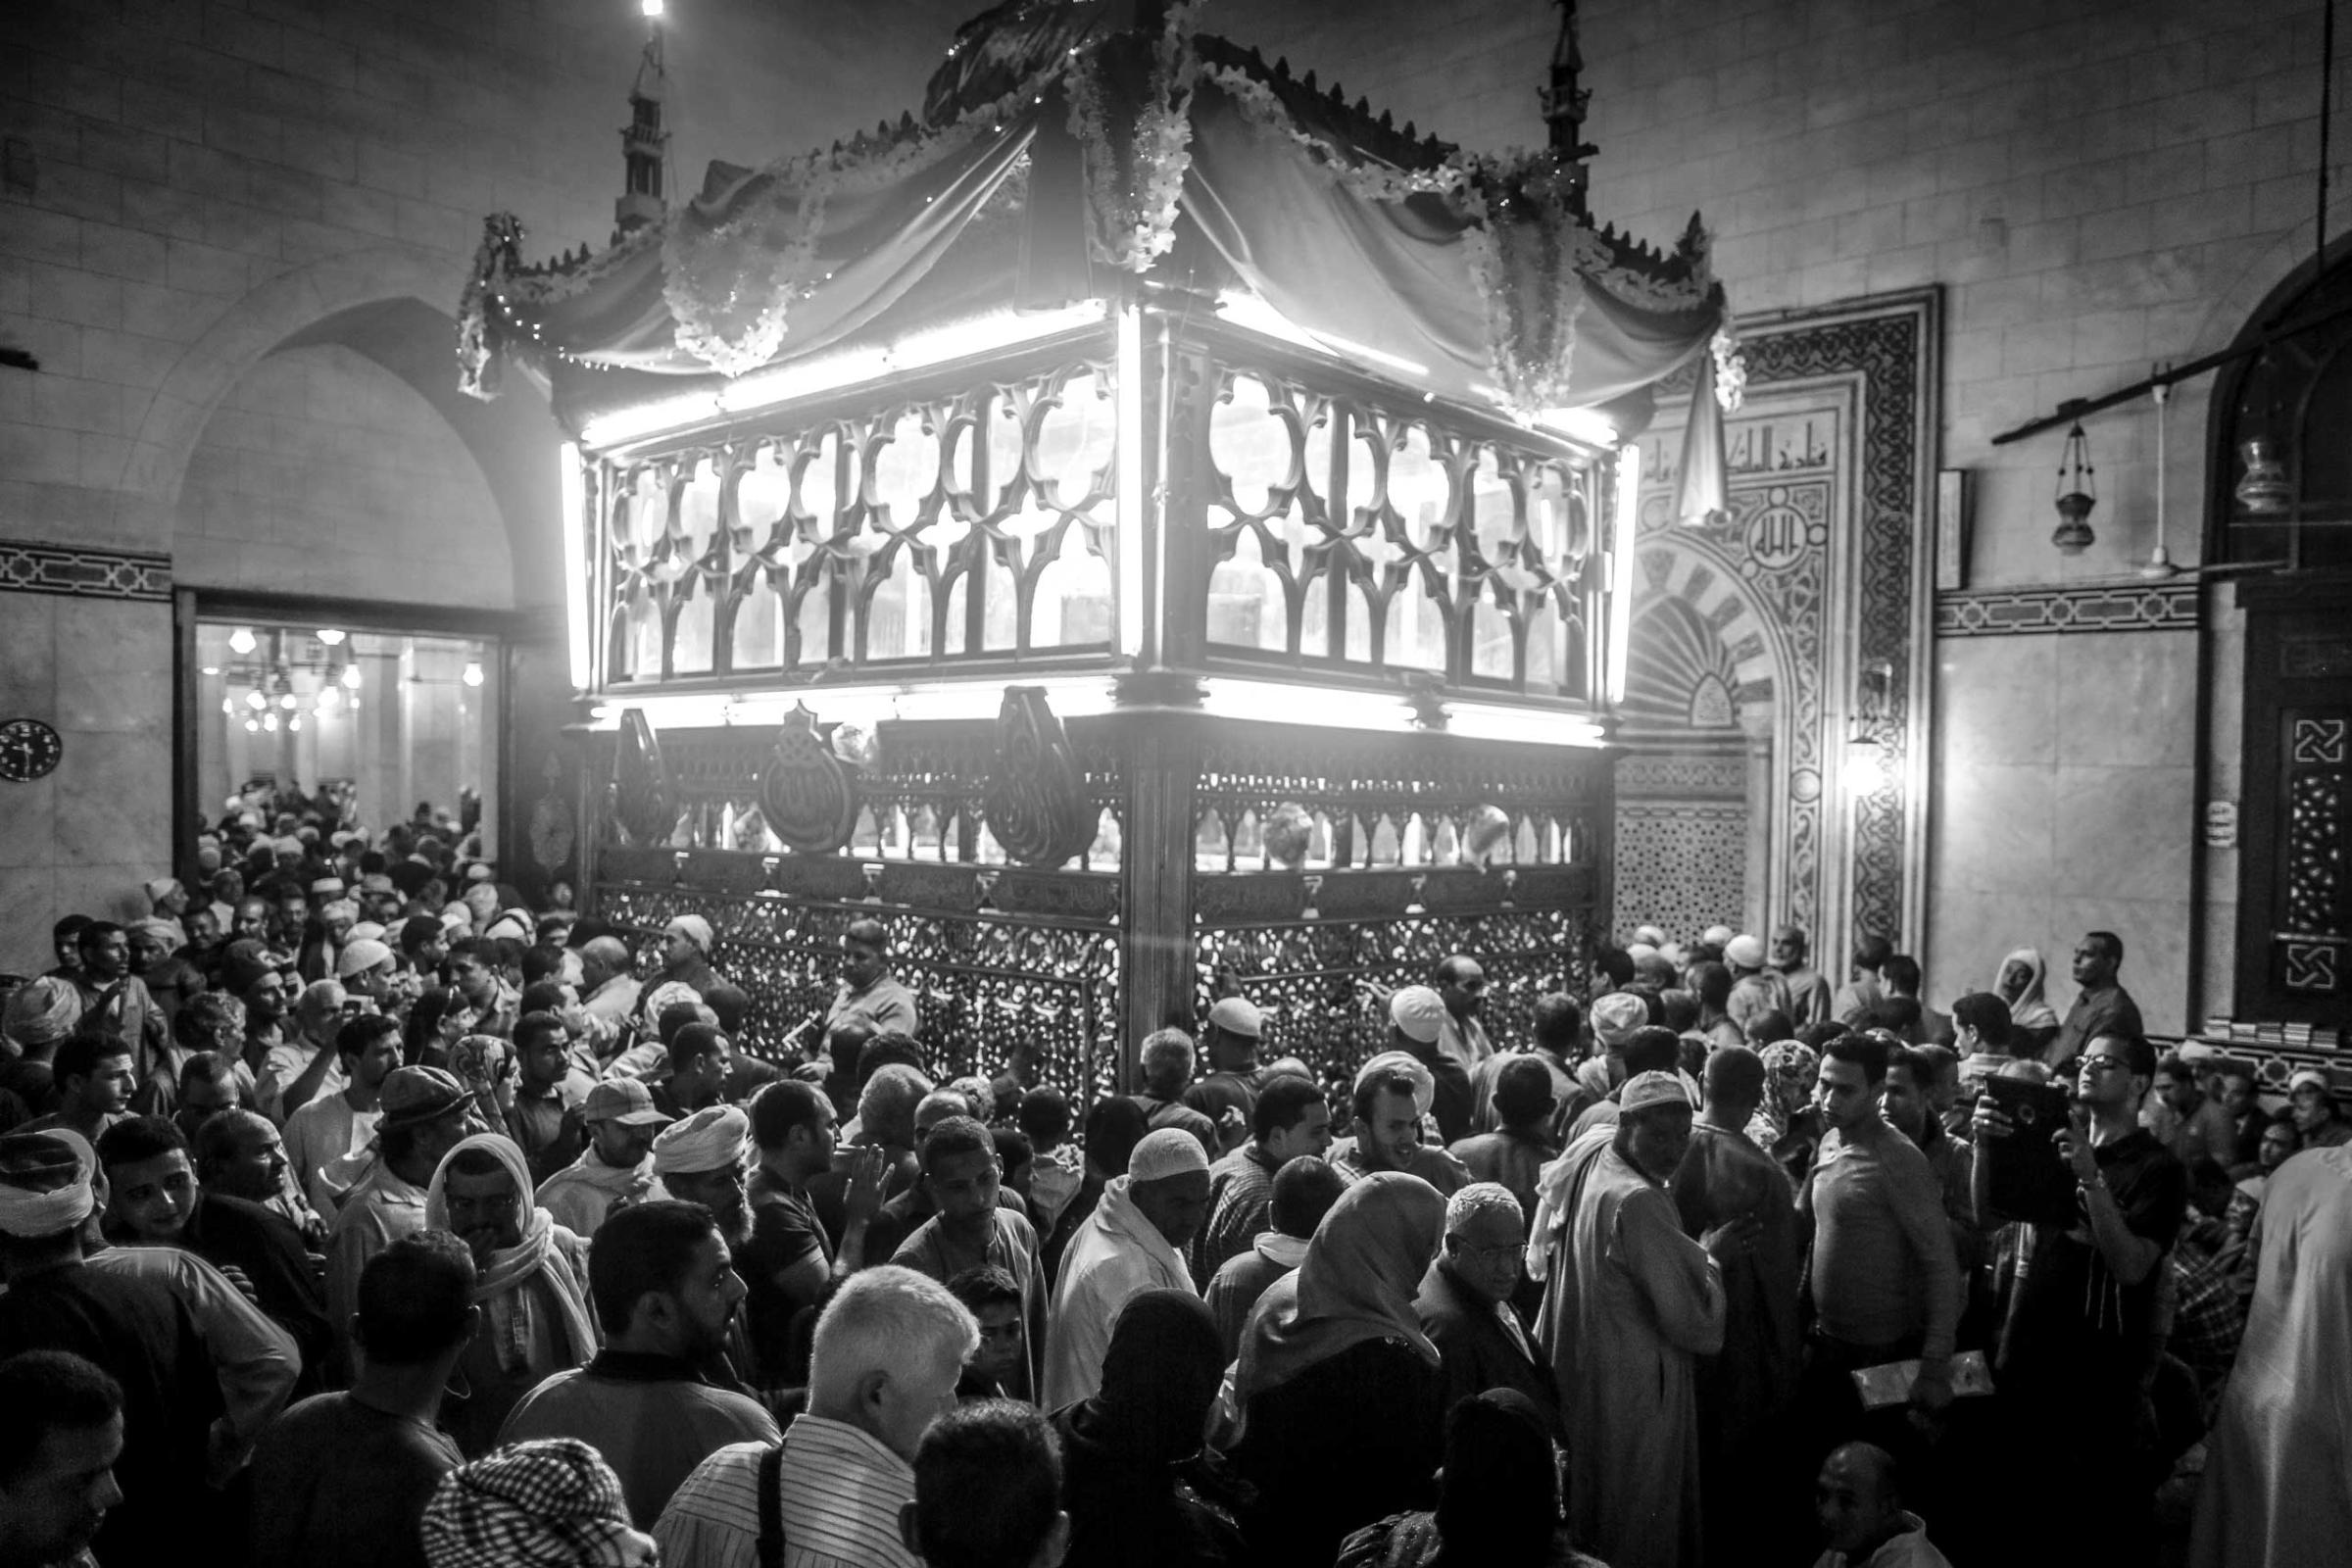 Sufi Muslims circle the shrine of El-Sayed El-Badawi in the delta town of Tanta, during the annual 'Mawlid' (festival) celebrating his birthday. El-Badawi festival is considered Egypt's most famous Mawlid, with millions of attendees from all over Egypt. Oct. 16, 2014.